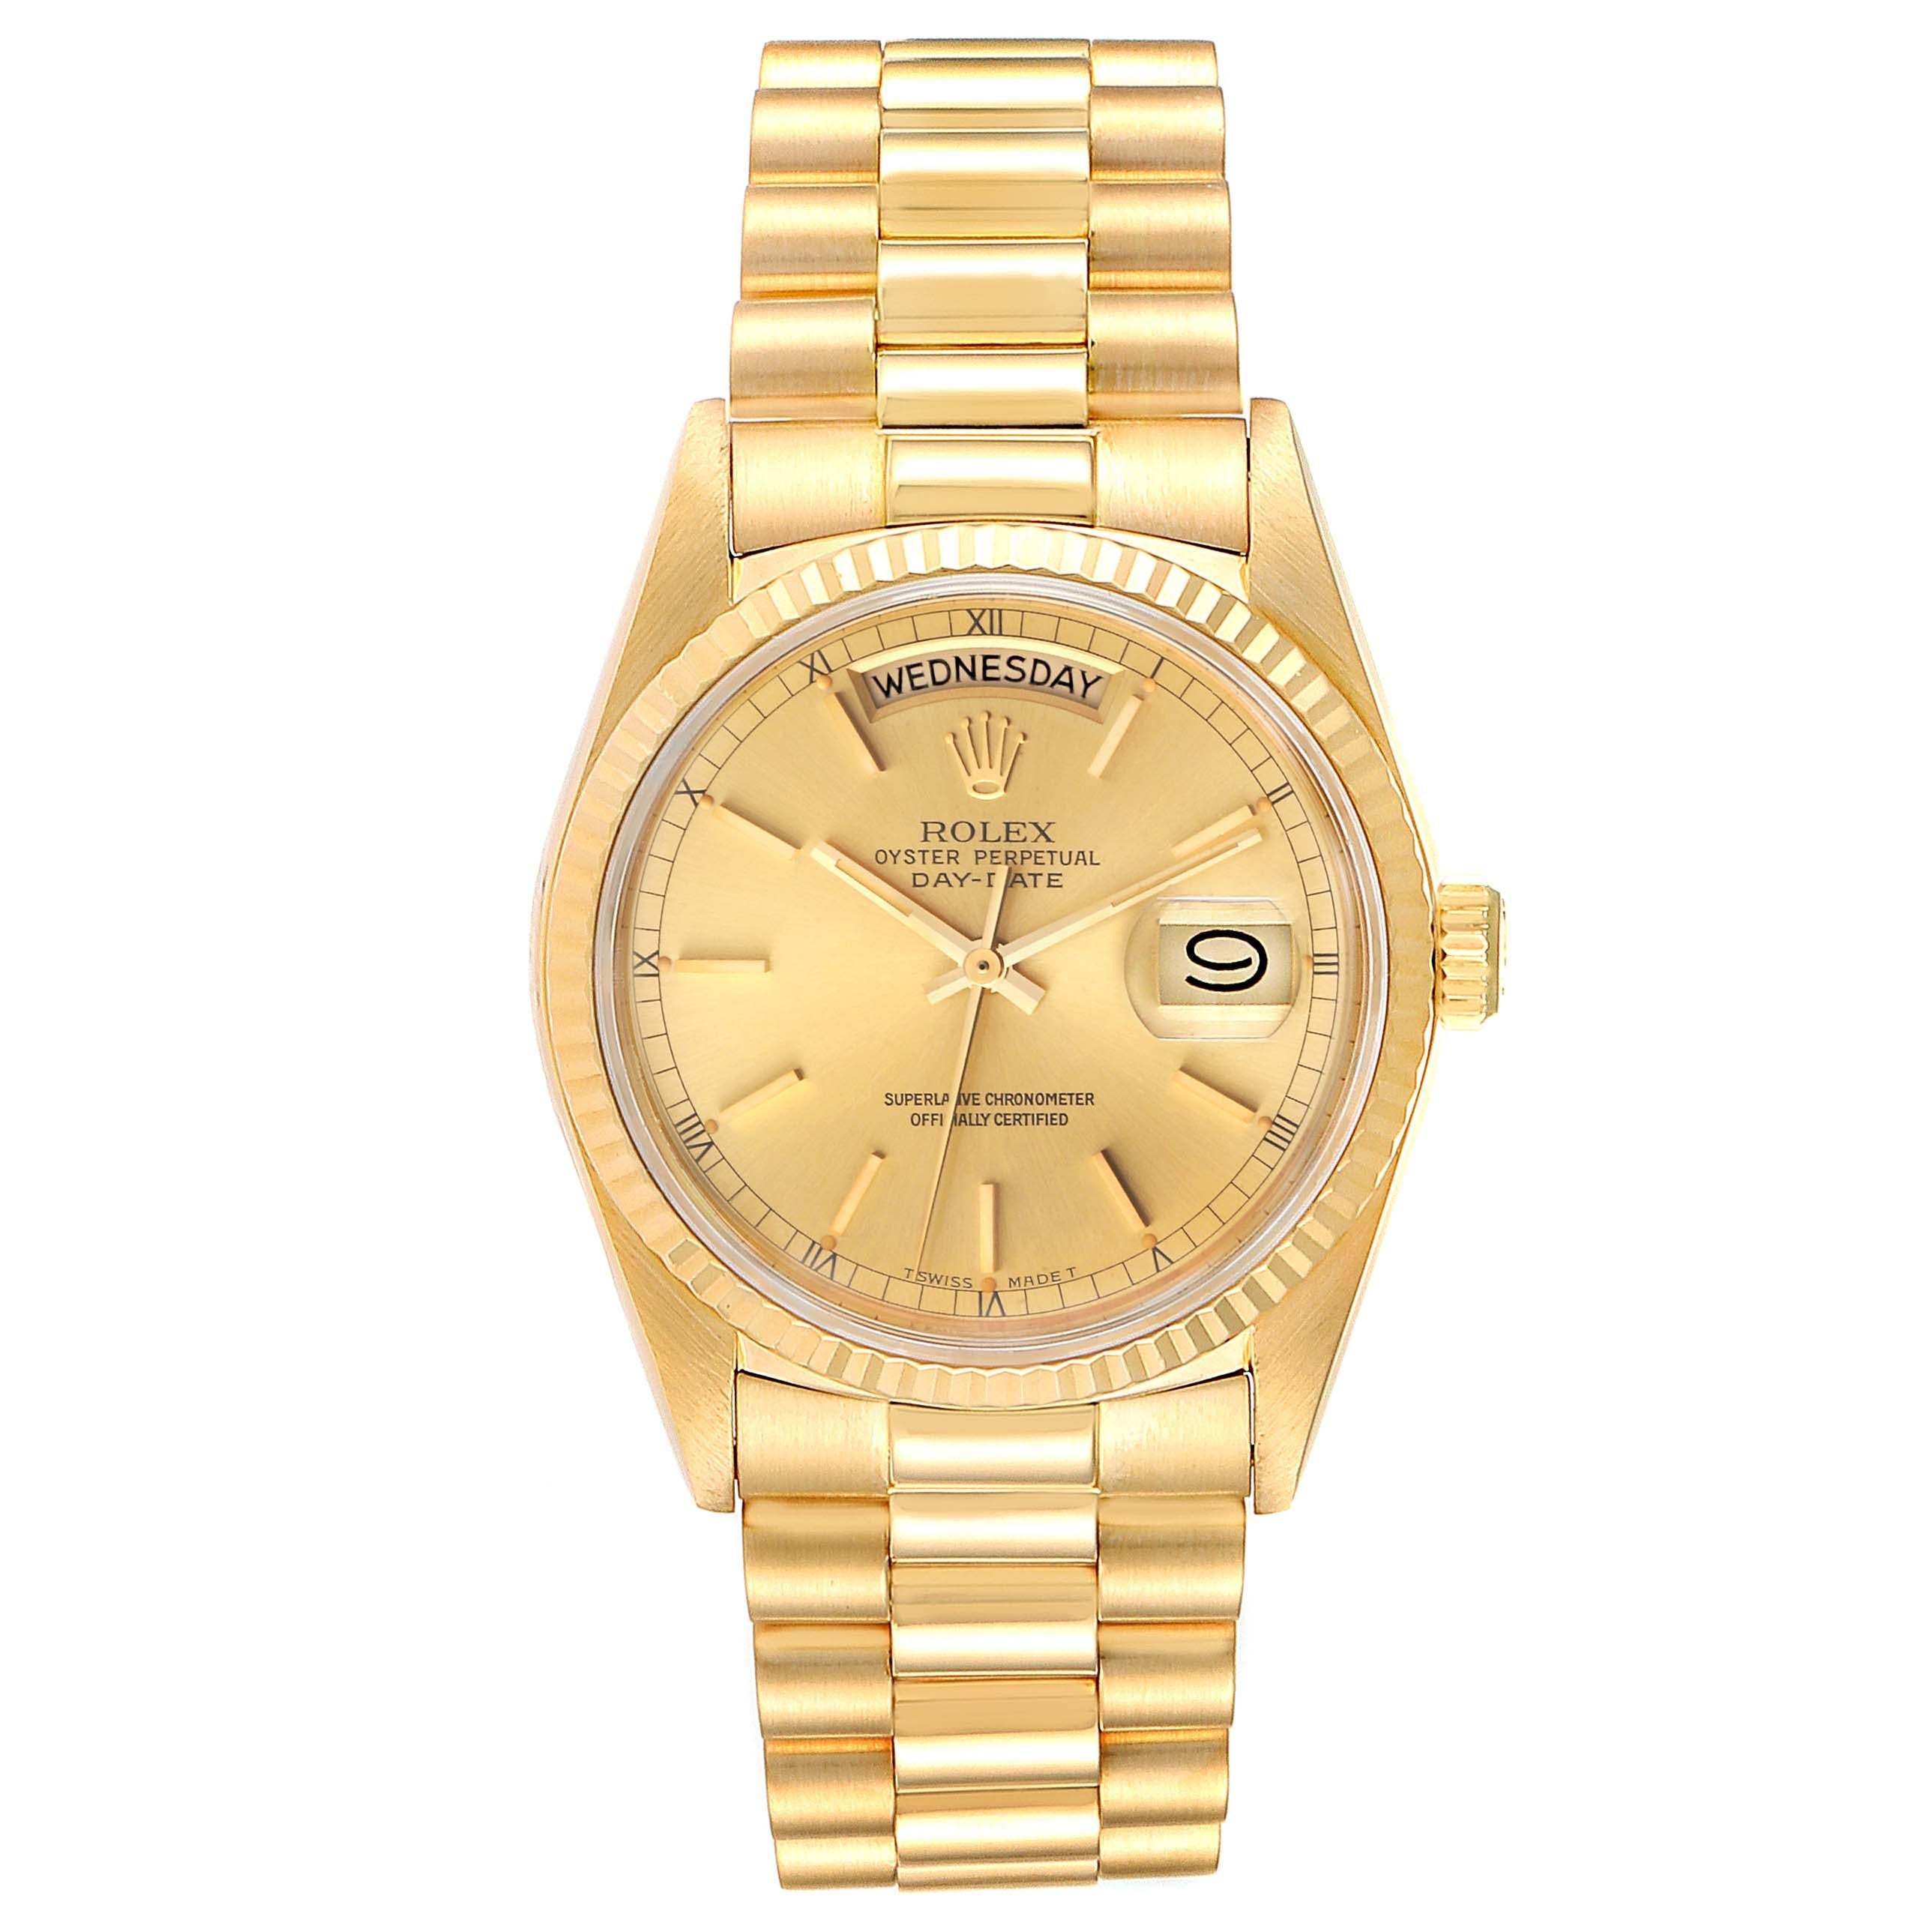 Rolex President Day-Date 36mm Yellow Gold Mens Watch 18038. Officially certified chronometer self-winding movement. 18k yellow gold oyster case 36.0 mm in diameter.  Rolex logo on a crown. 18k yellow gold fluted bezel. Scratch resistant sapphire